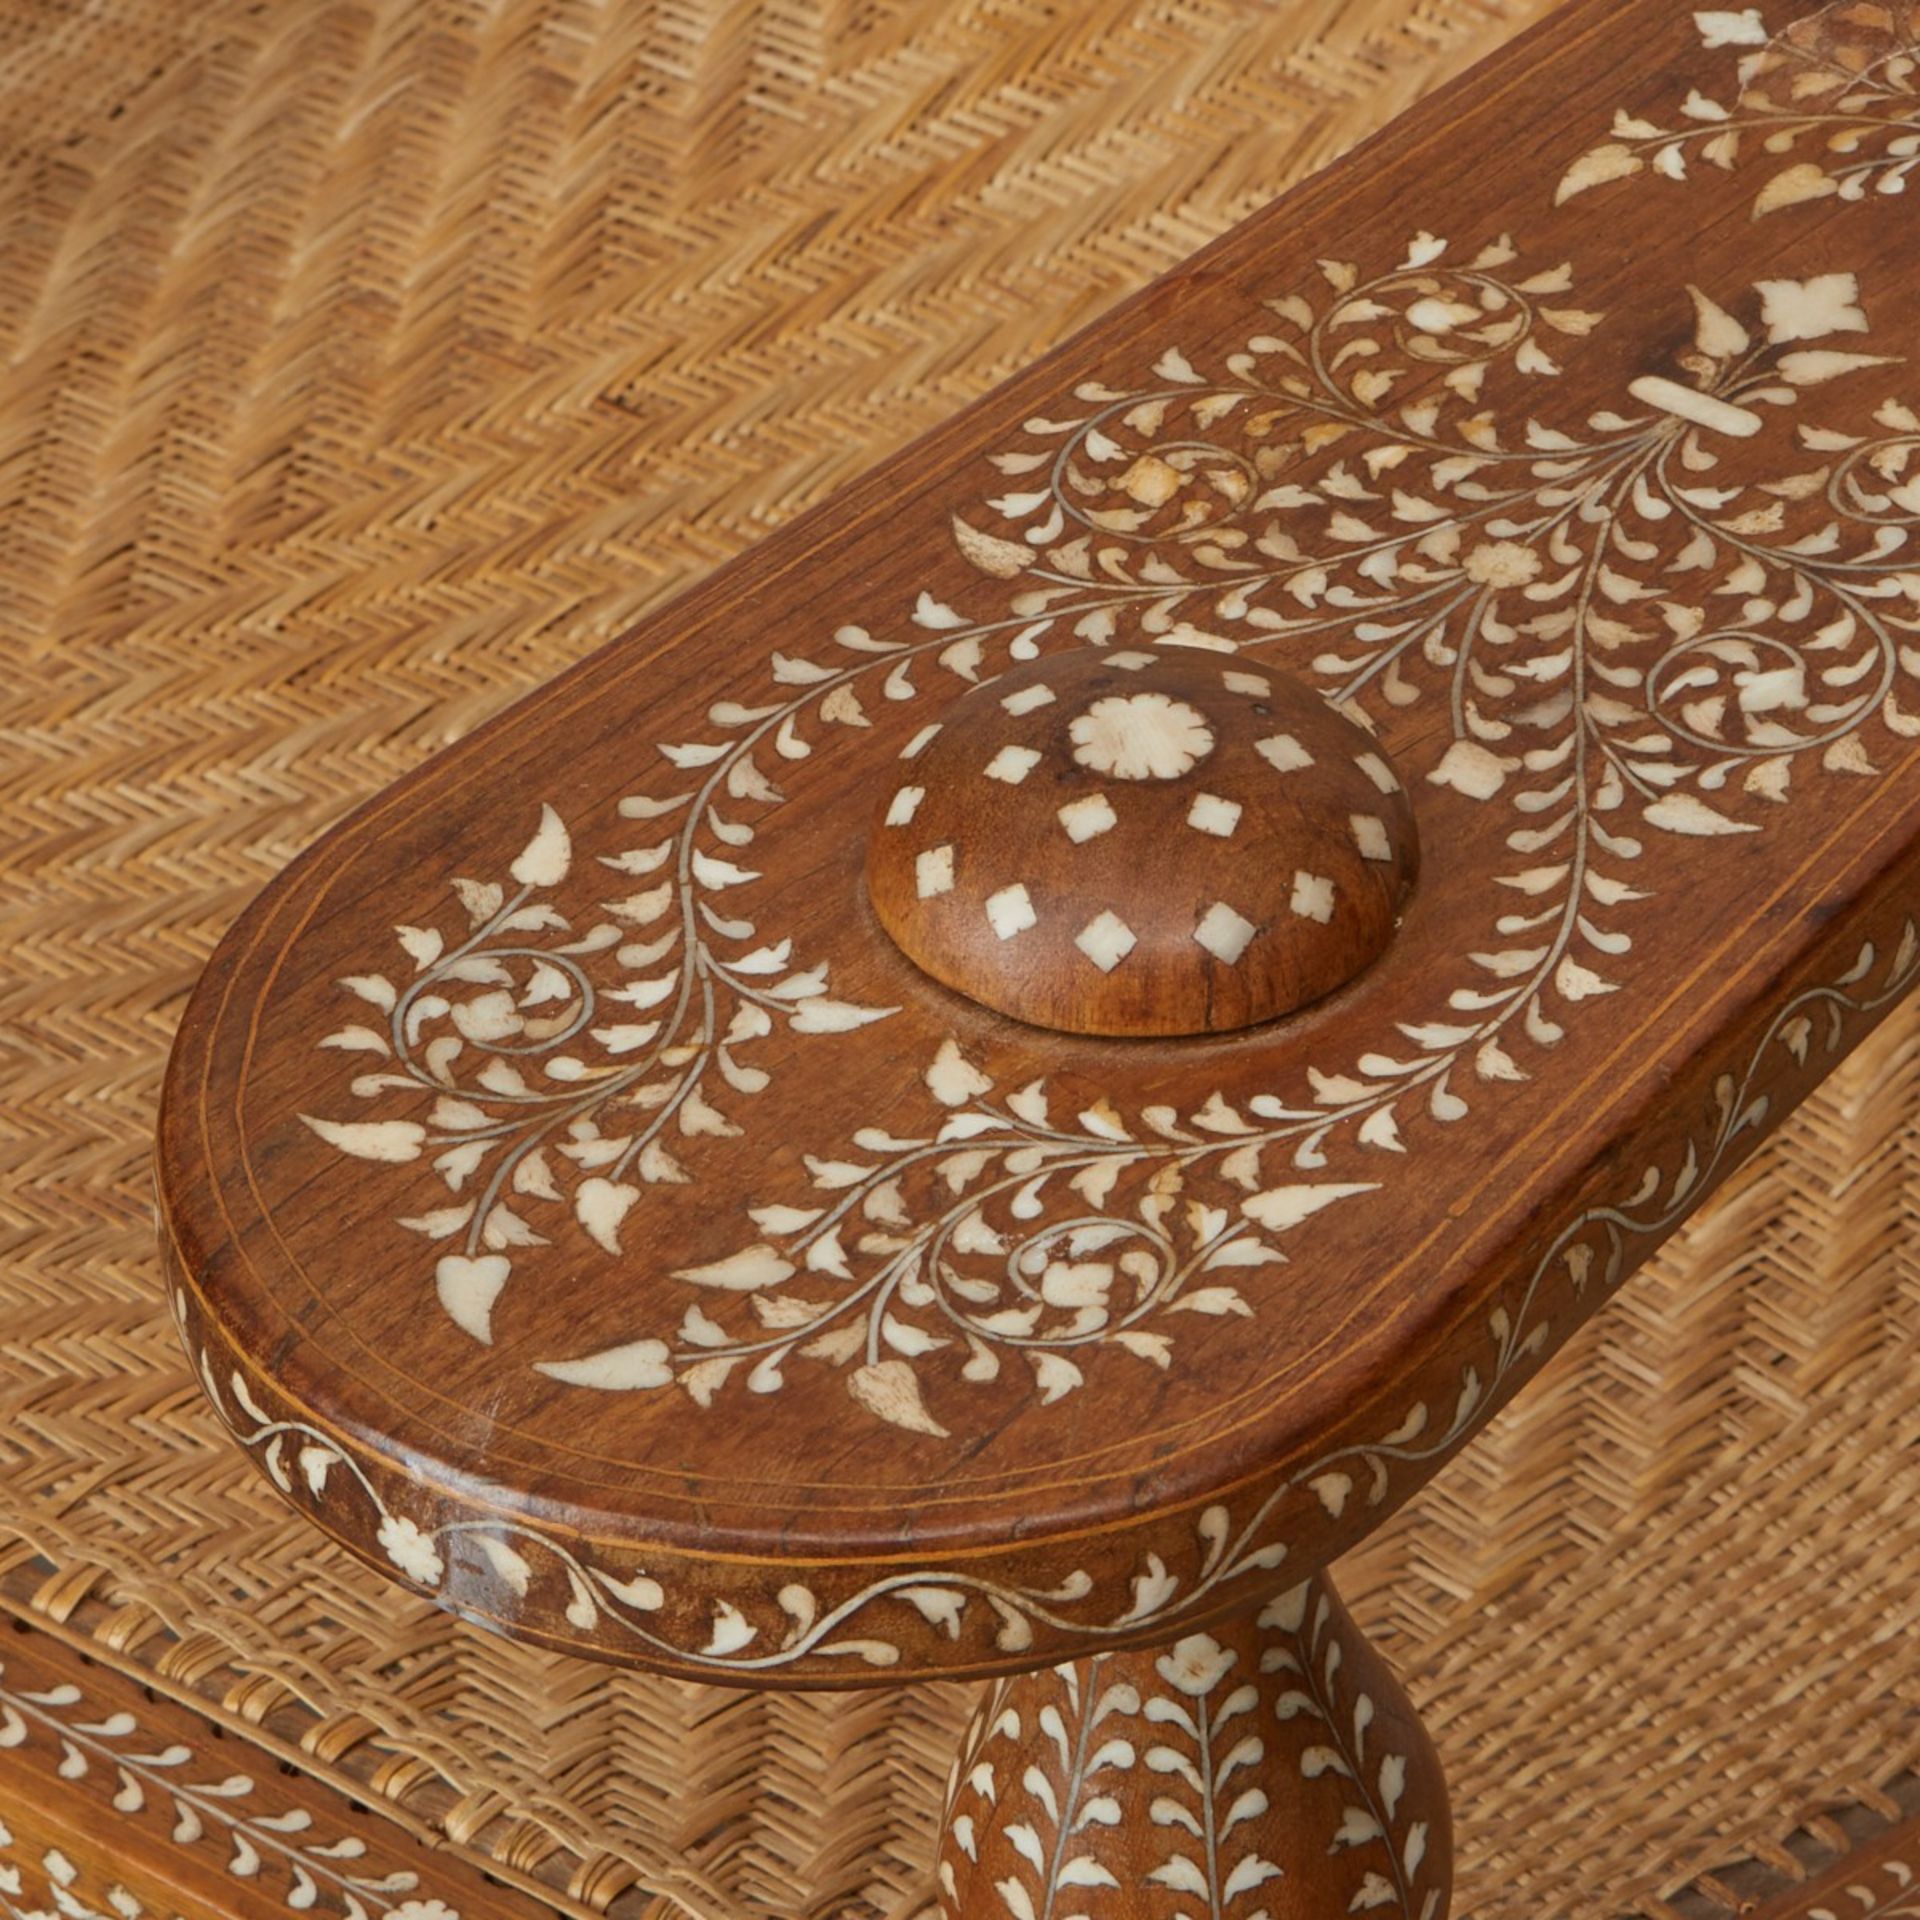 Syrian Inlaid Mother of Pearl Plantation Chair - Image 15 of 16